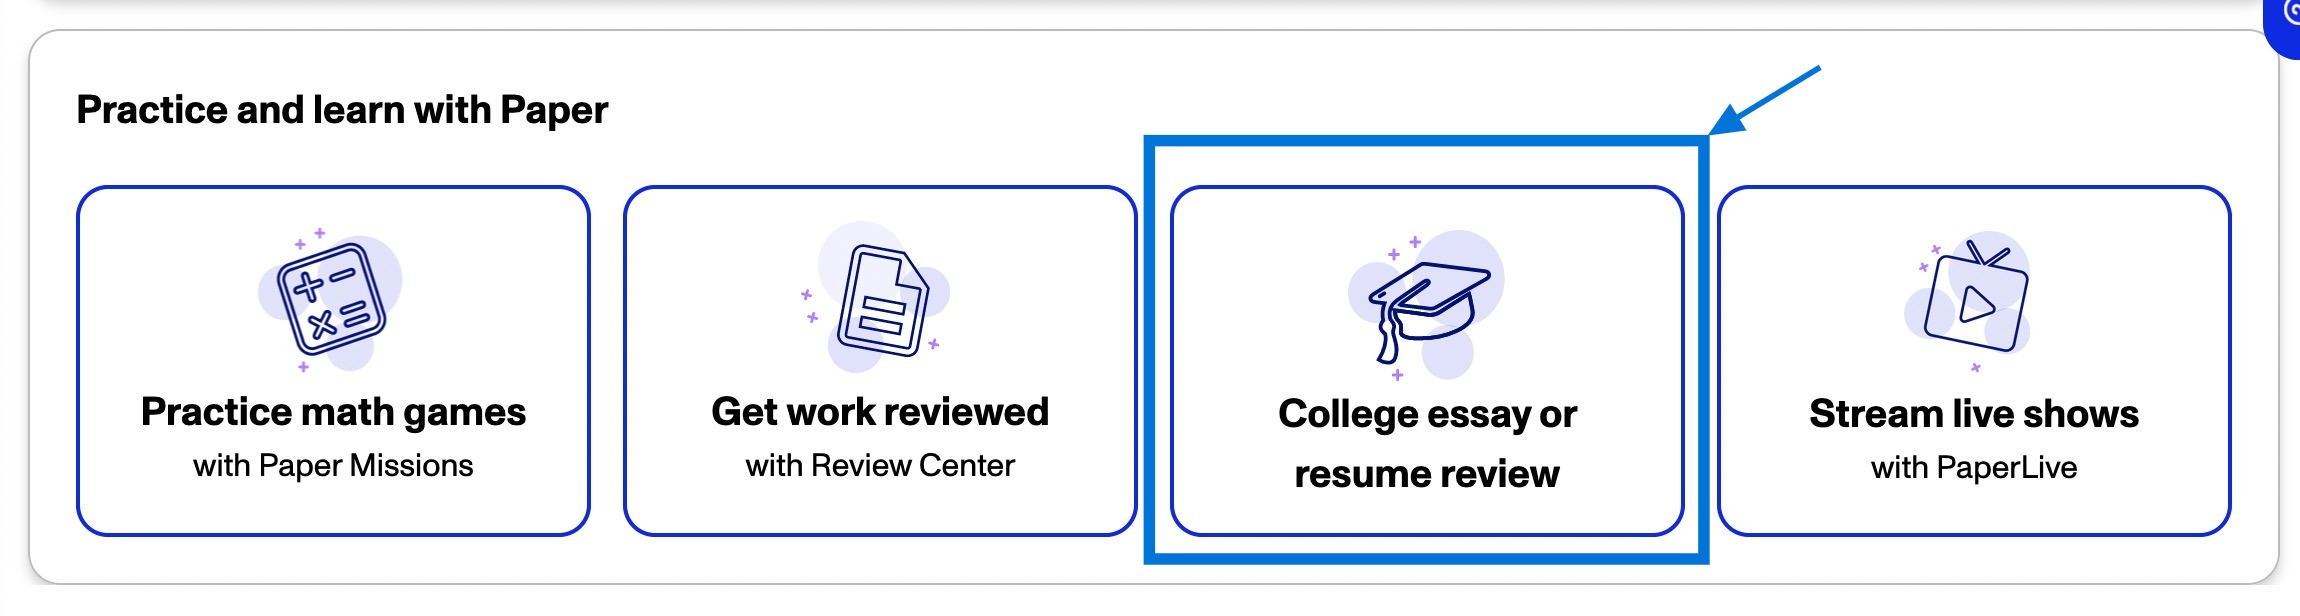 Paper_College_essay_or_resume_review.jpg